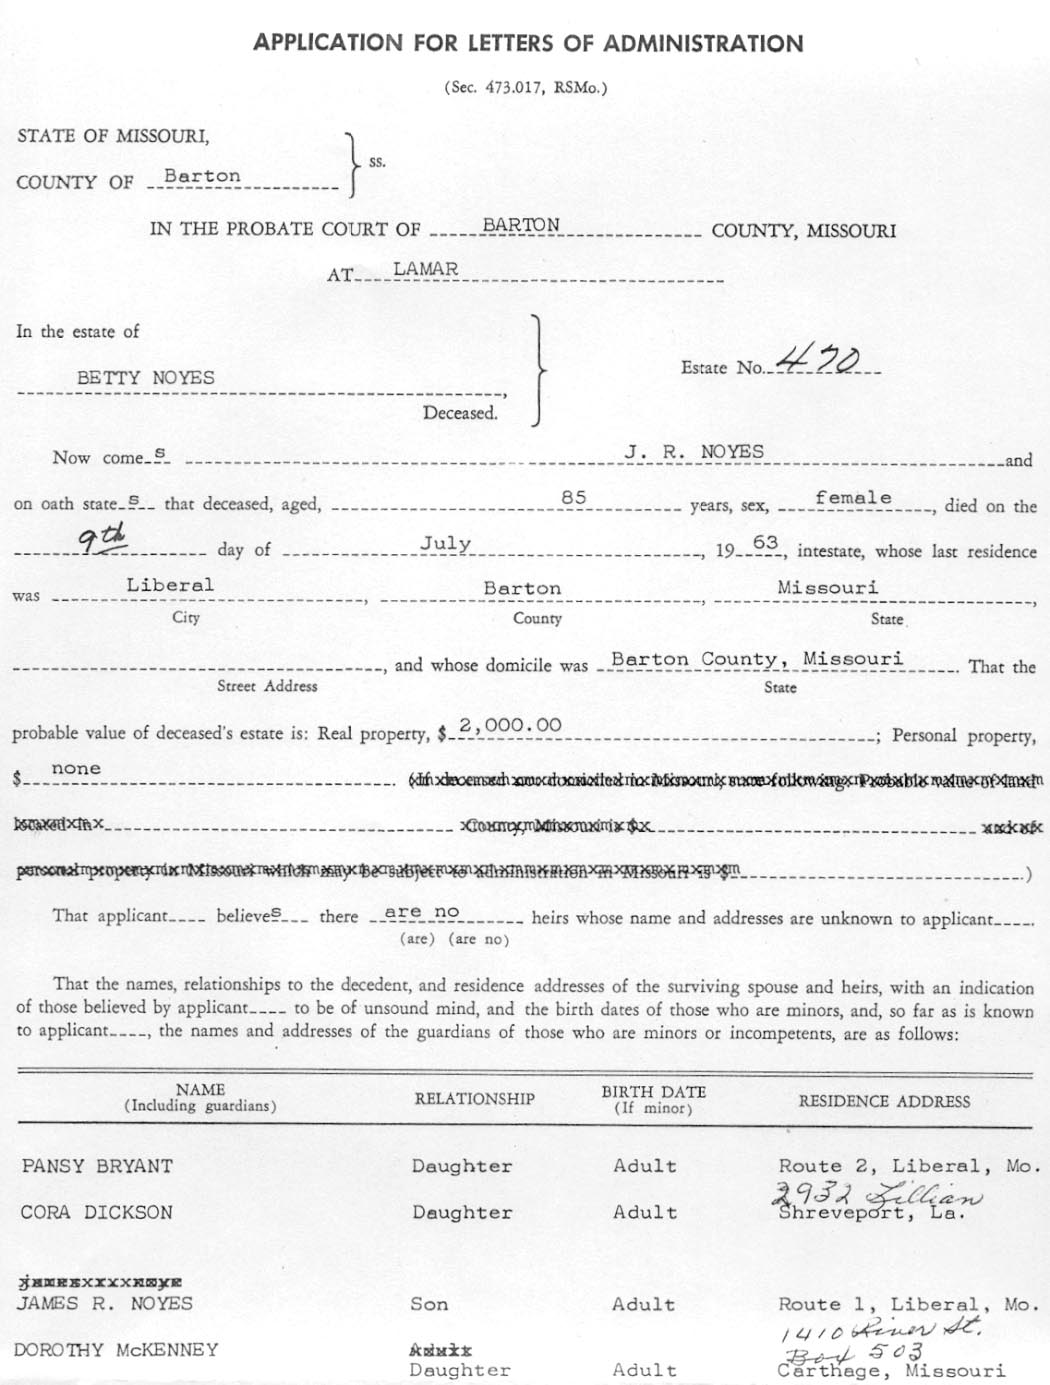 Elizabeth “Bettie” Brewer Noyes, Application for Letters of Administration